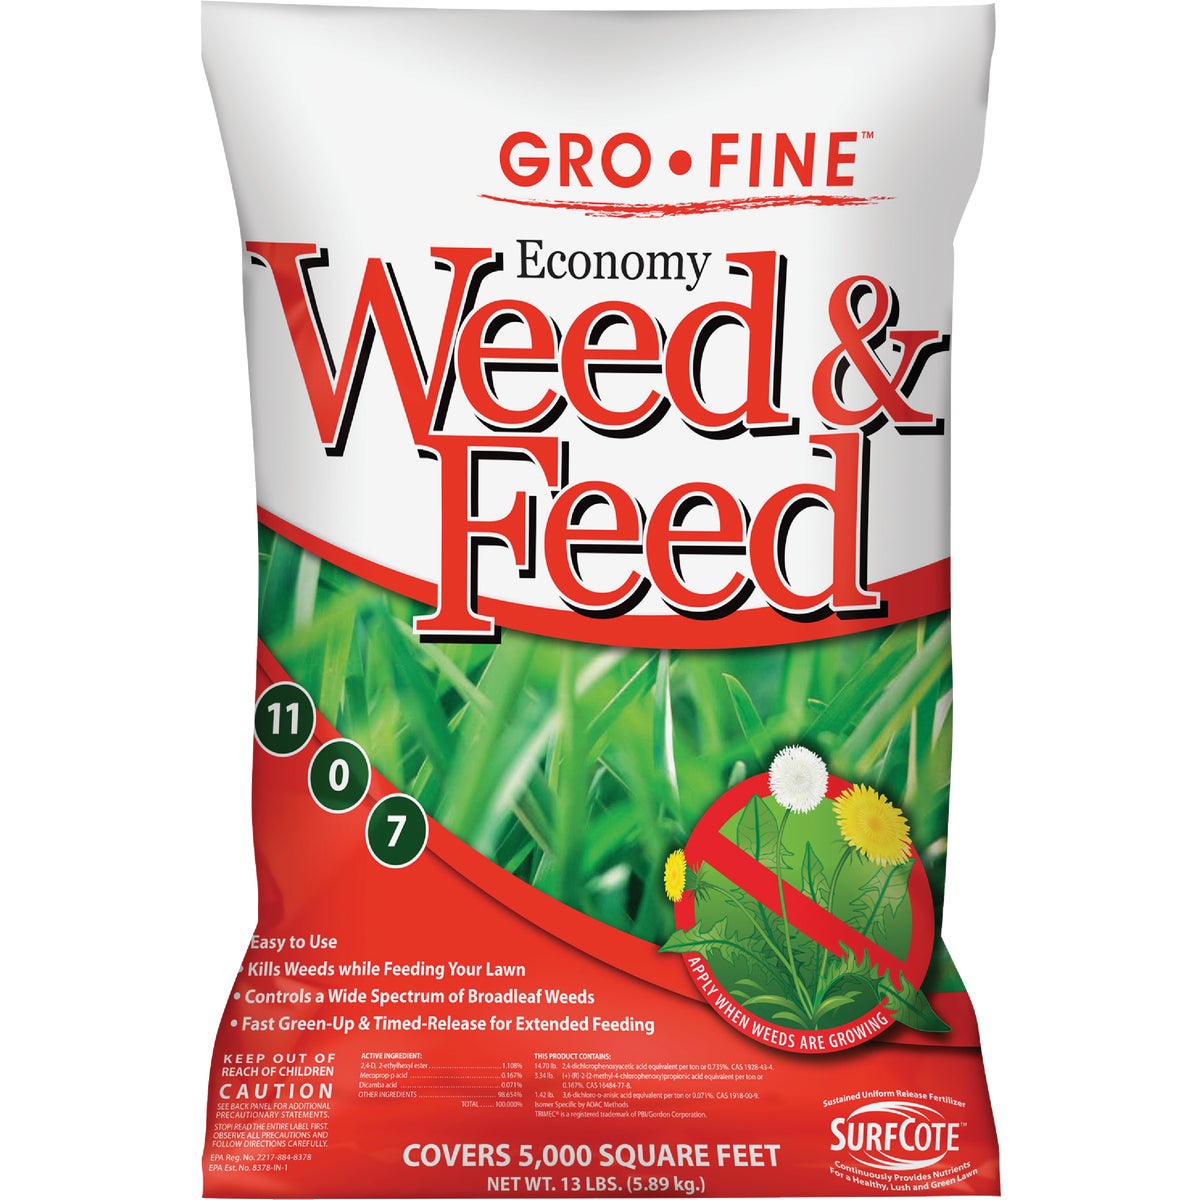 Gro-Fine Economy Weed & Feed 13 Lb. 5000 Sq. Ft. 11-0-7 Lawn Fertilizer with Weed Killer